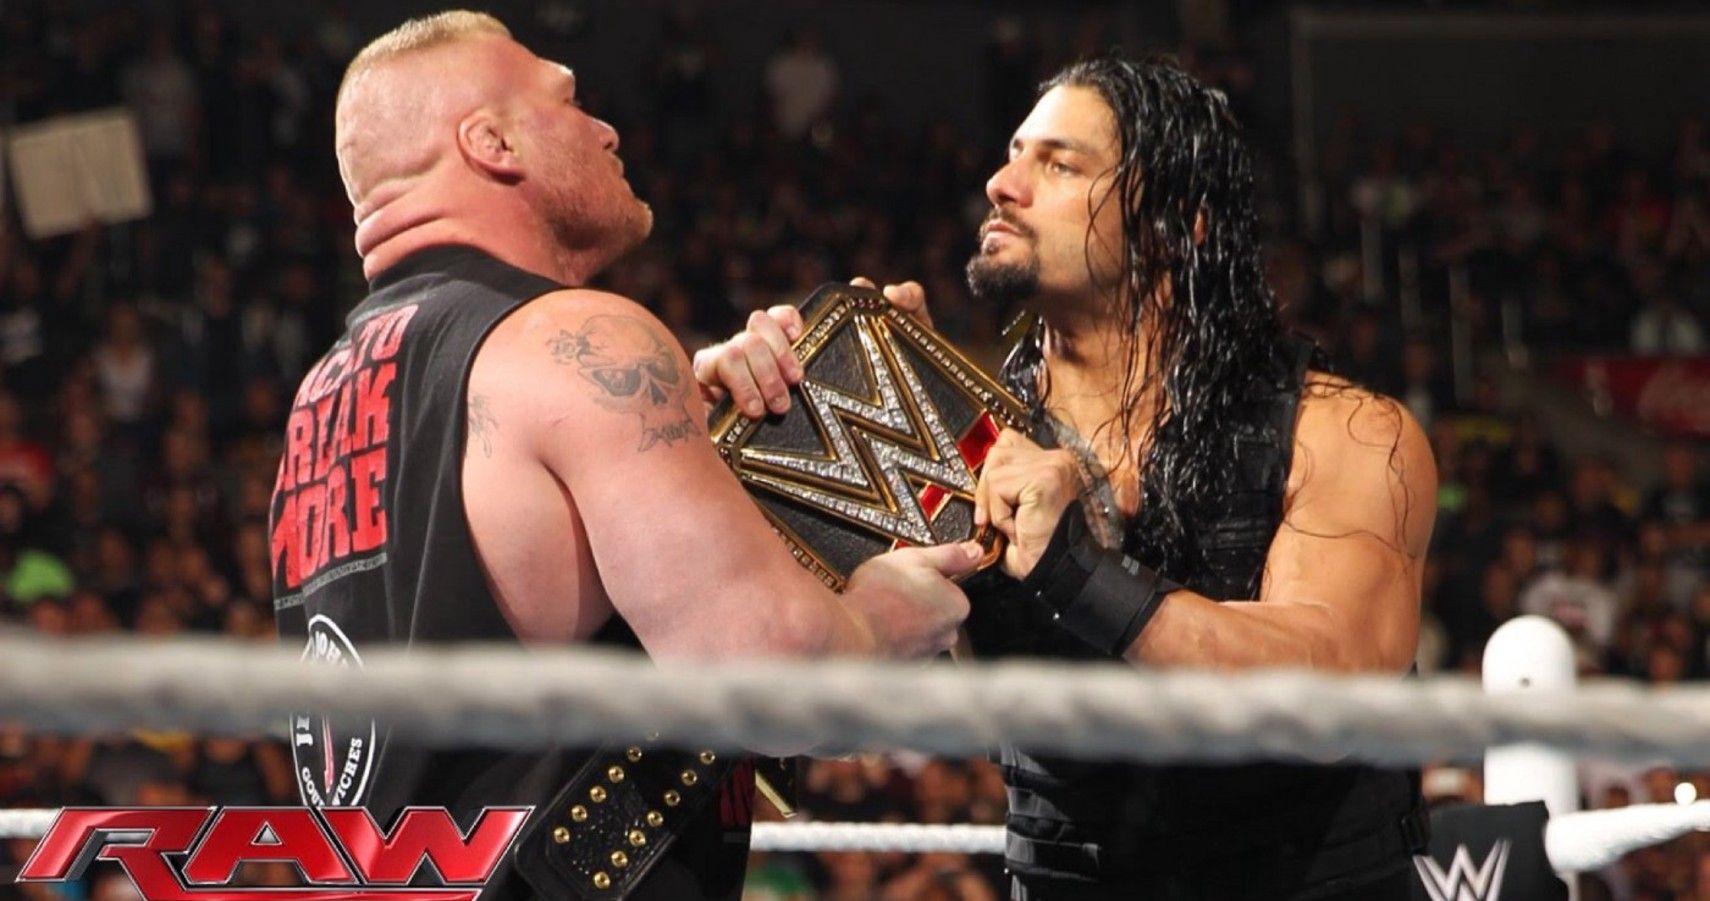 Roman Reigns vs. Brock Lesnar At WrestleMania Is On The Table (Just Not